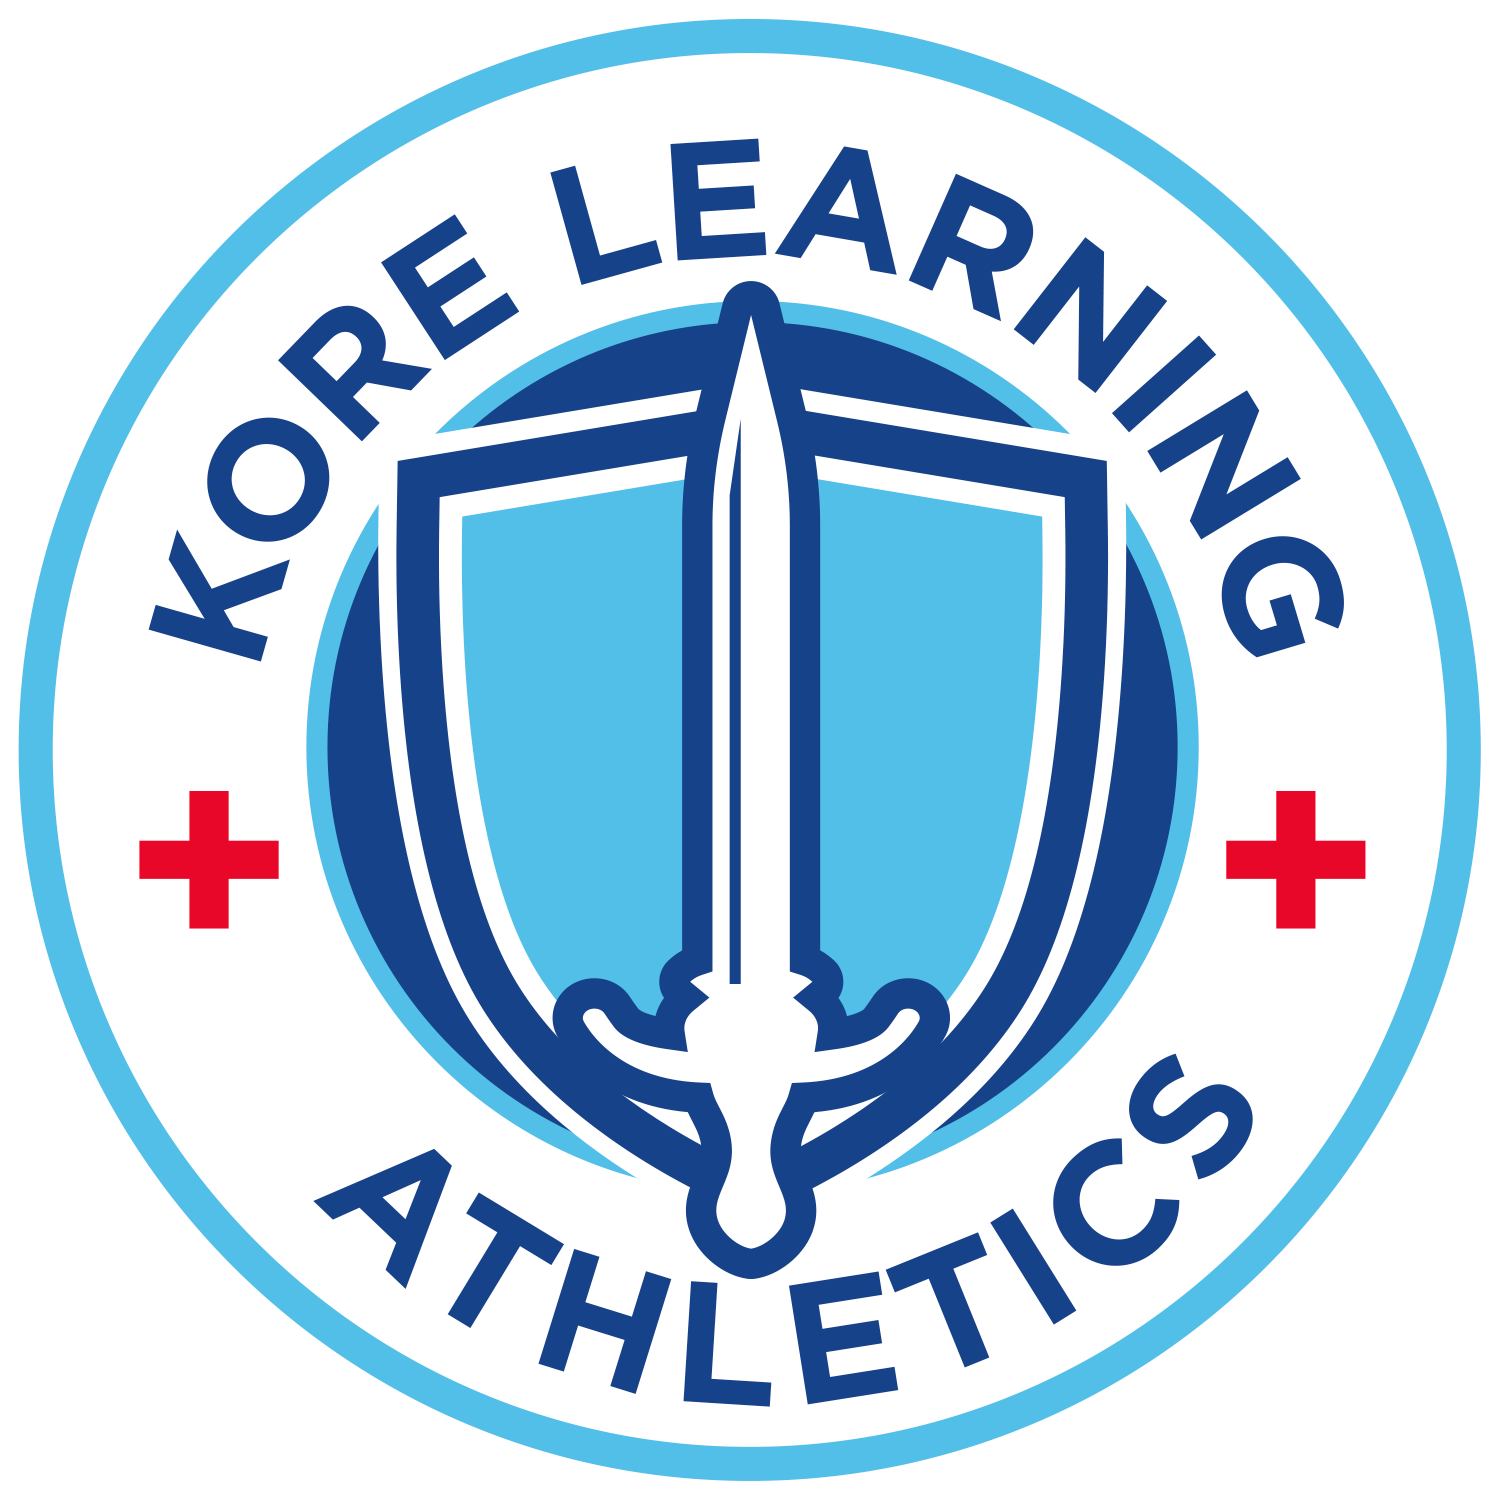 Kore Learning Athletics - Best Daycare in Faribault